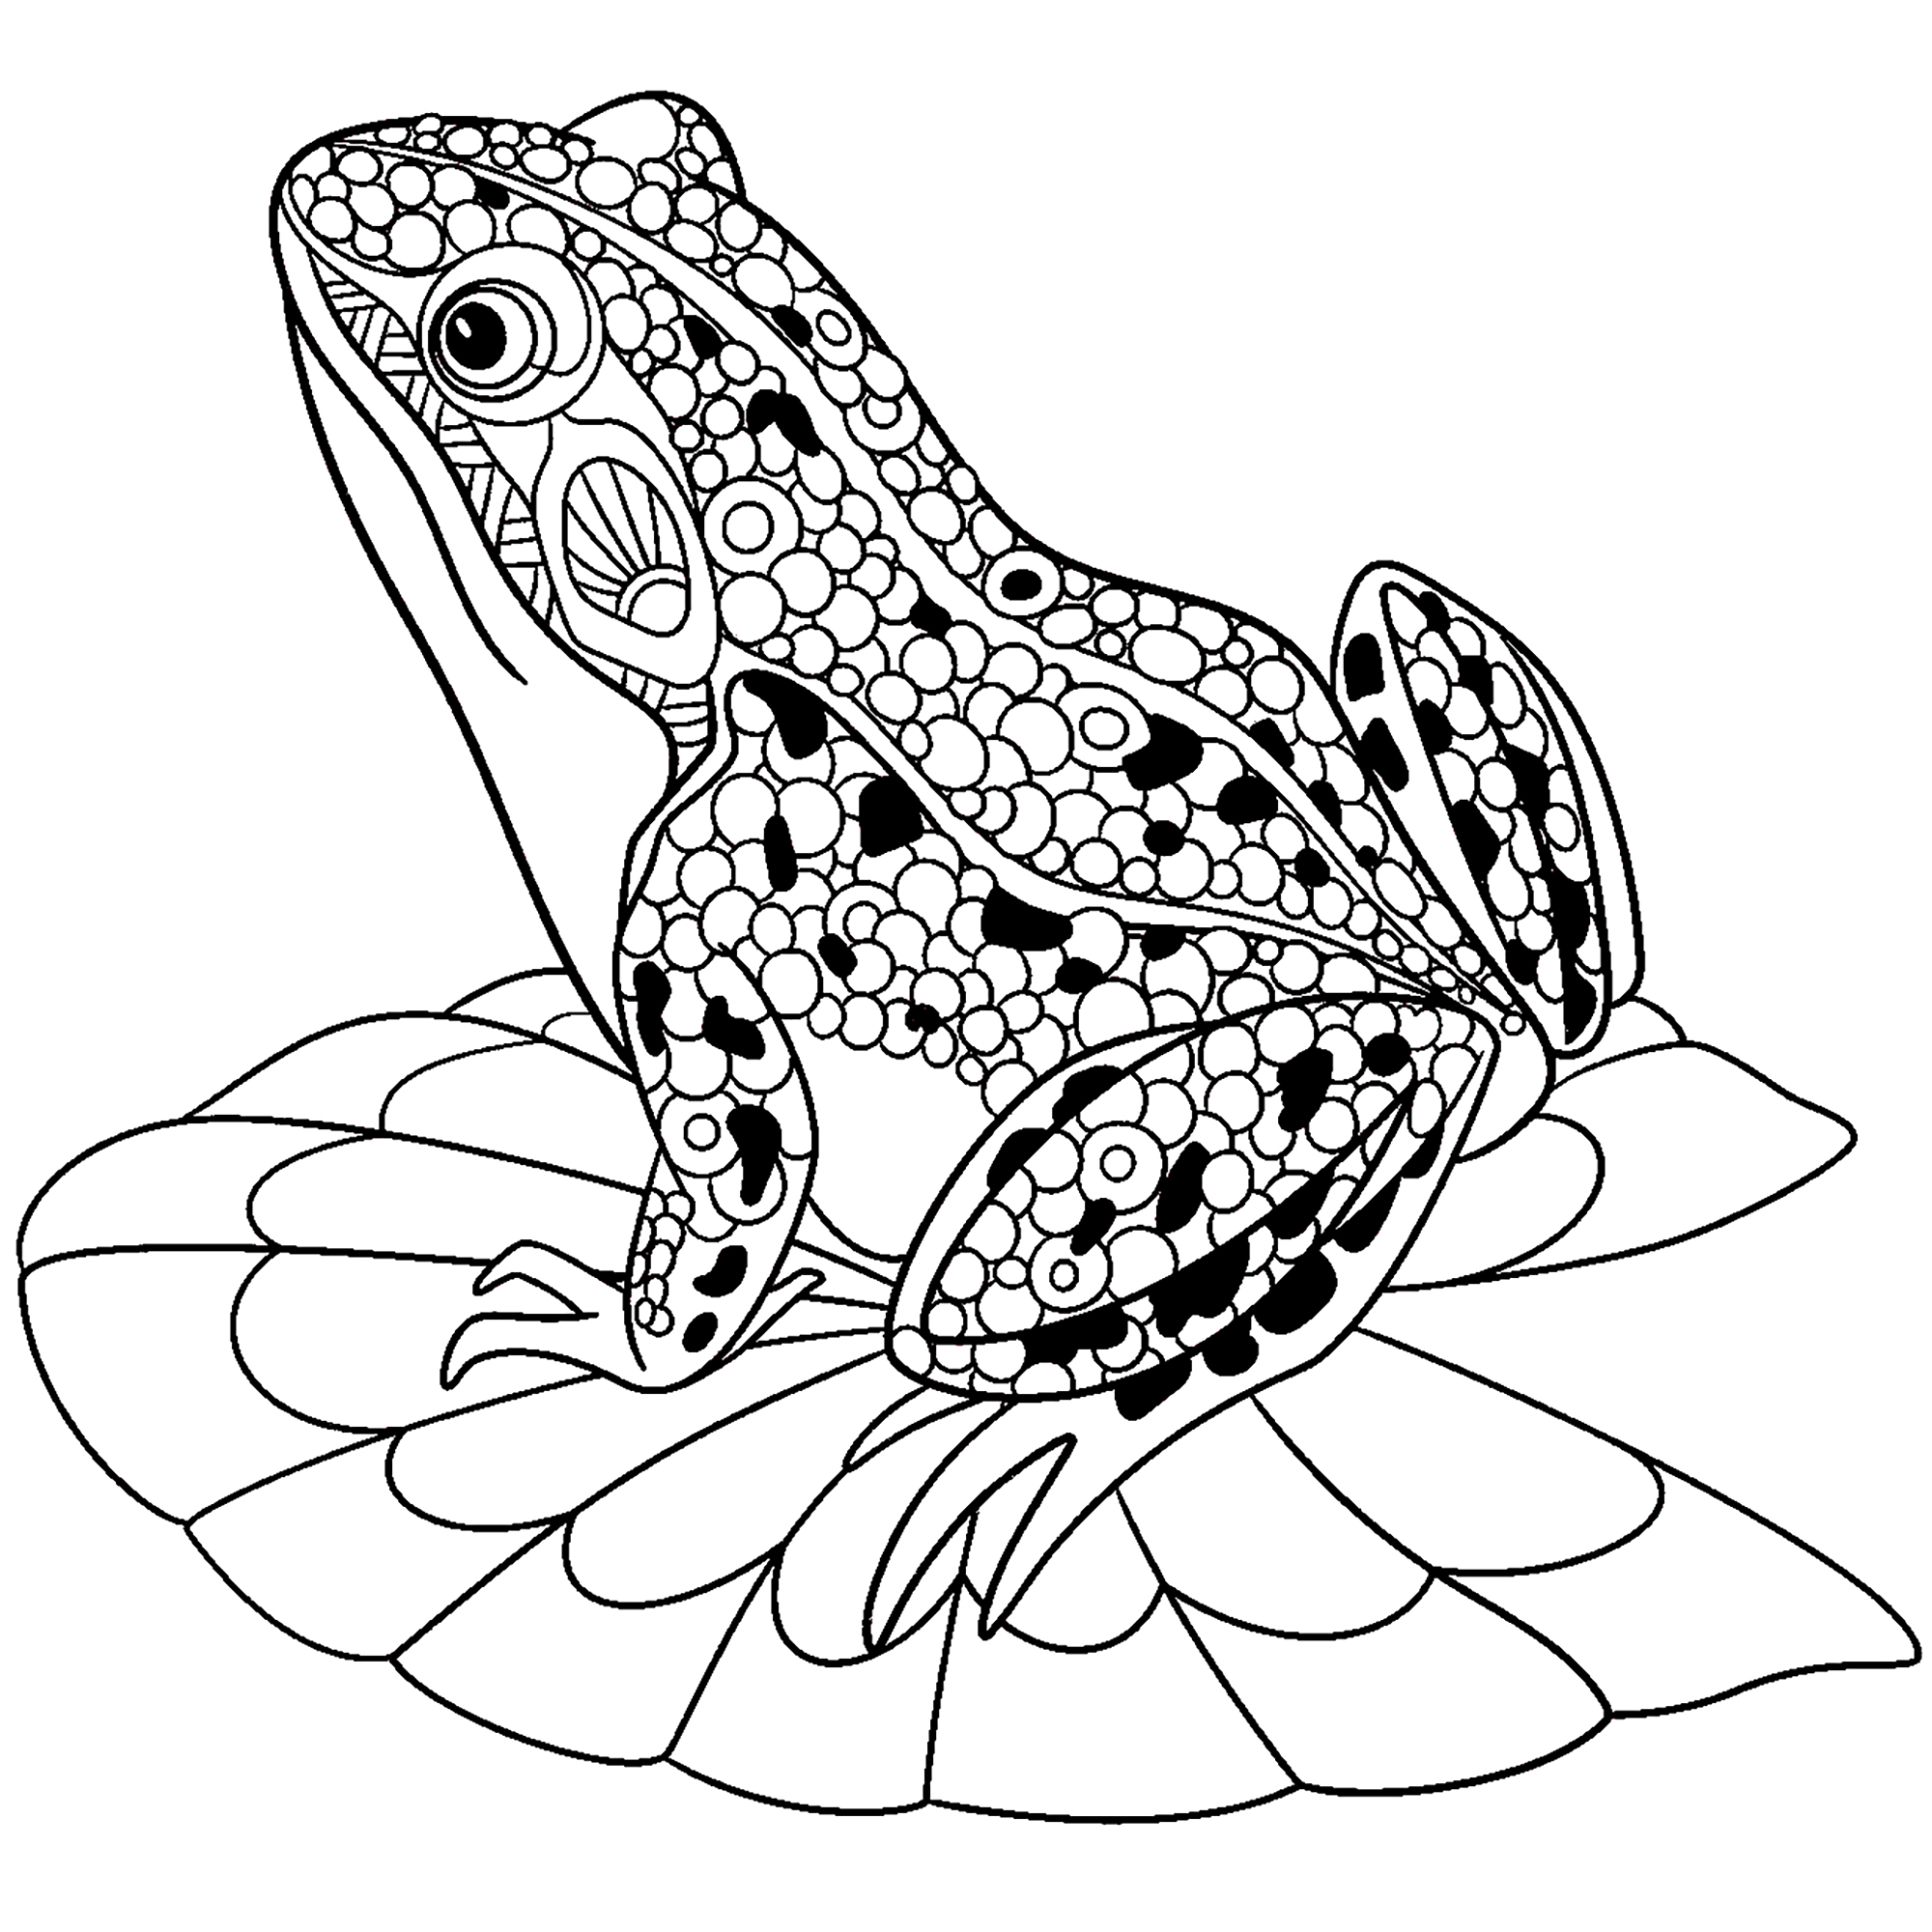 Download Cute frog on water lily leaf - Frogs Adult Coloring Pages